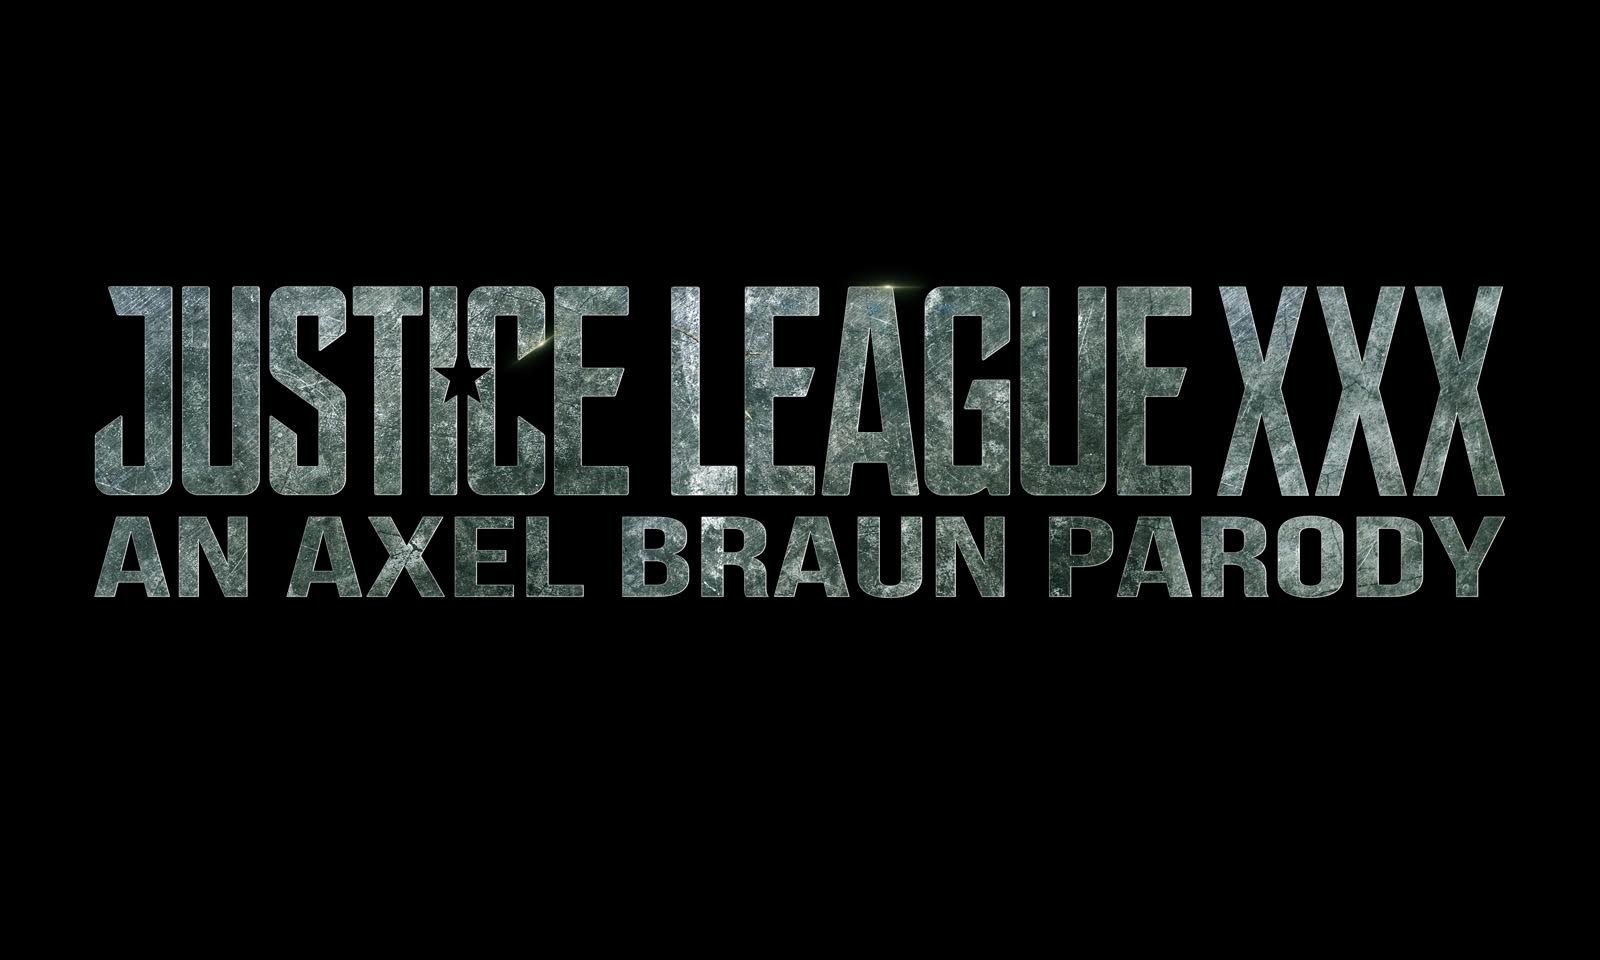 Production Begins on Wicked's 'Justice League XXX'